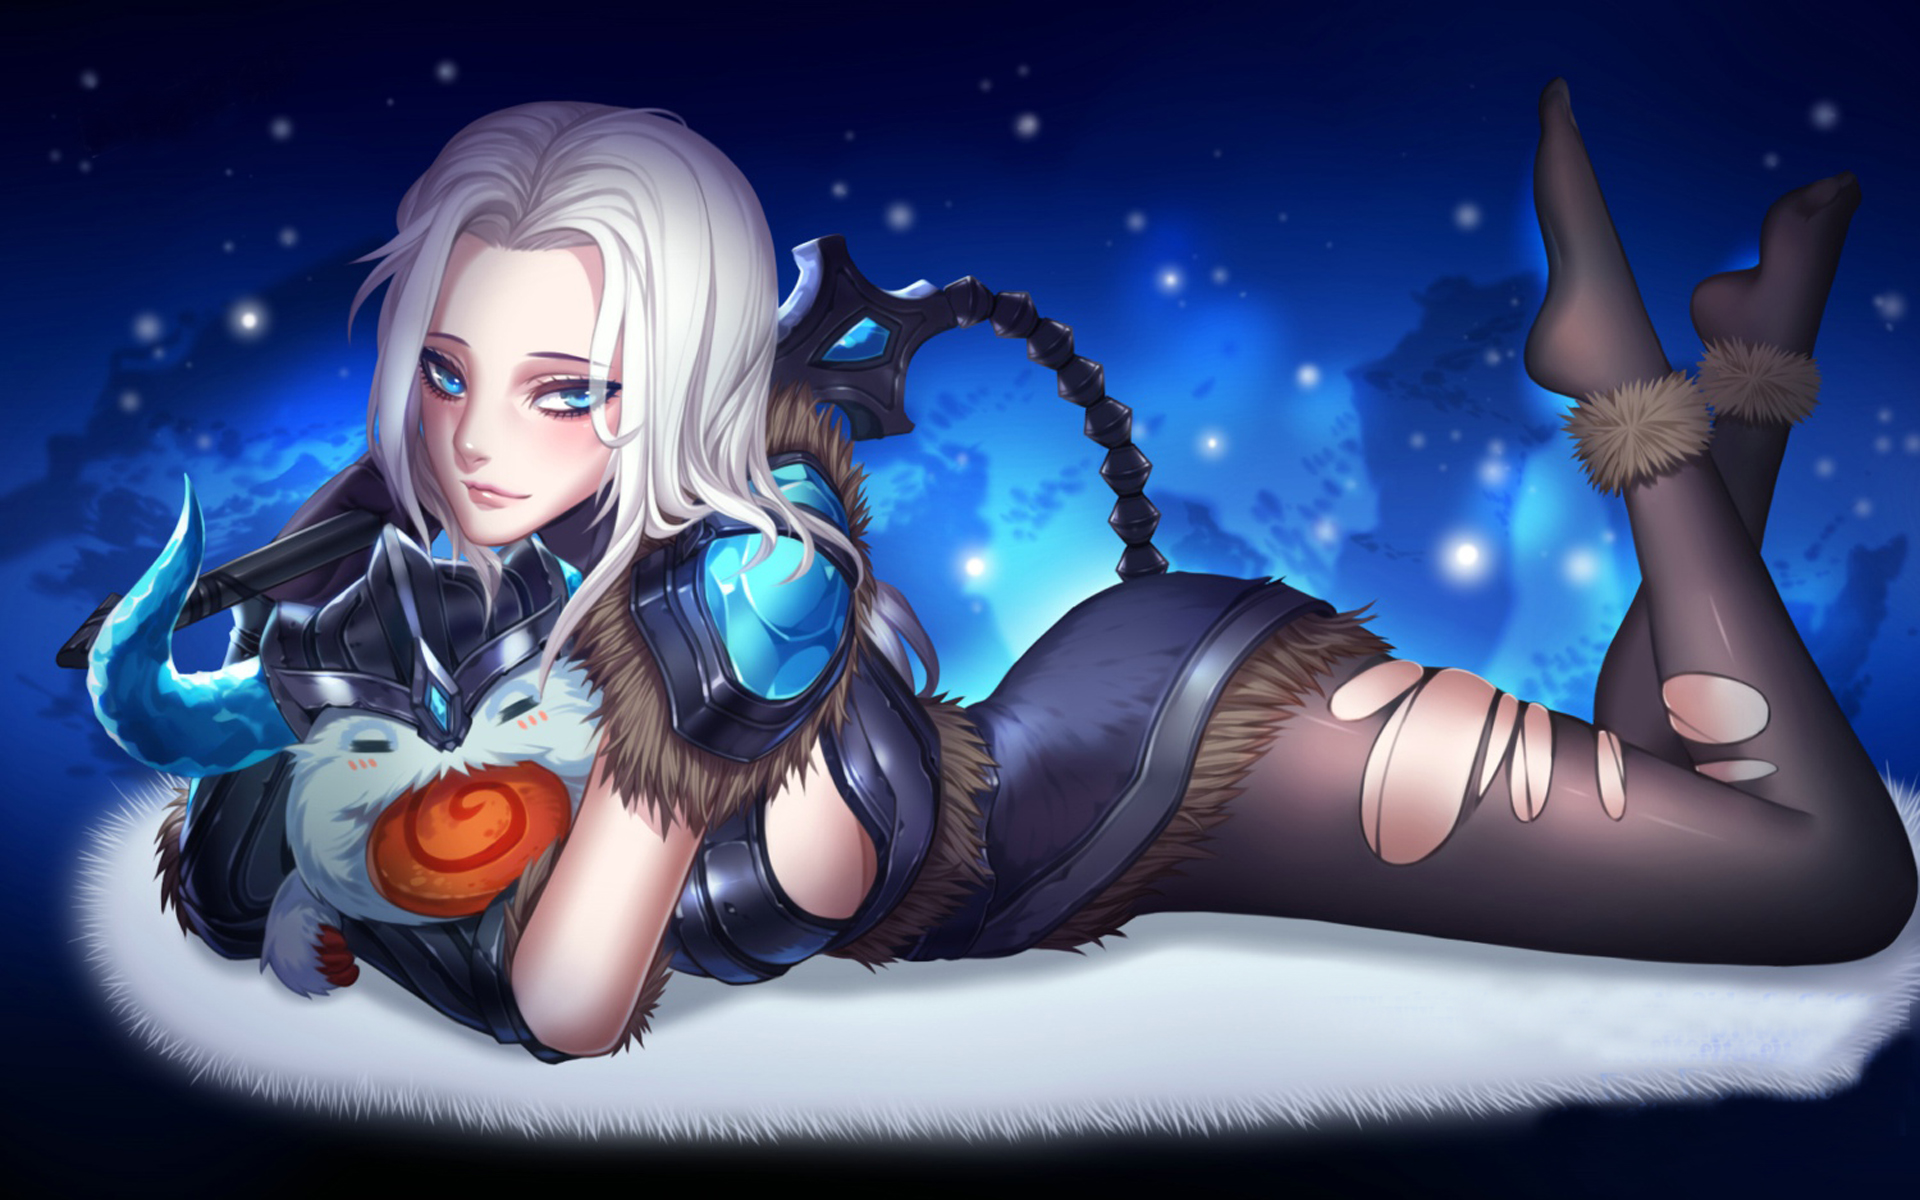 Beautiful Girl With White Hair And Blue Eyes Armor Torn Tights Sky Star Des...